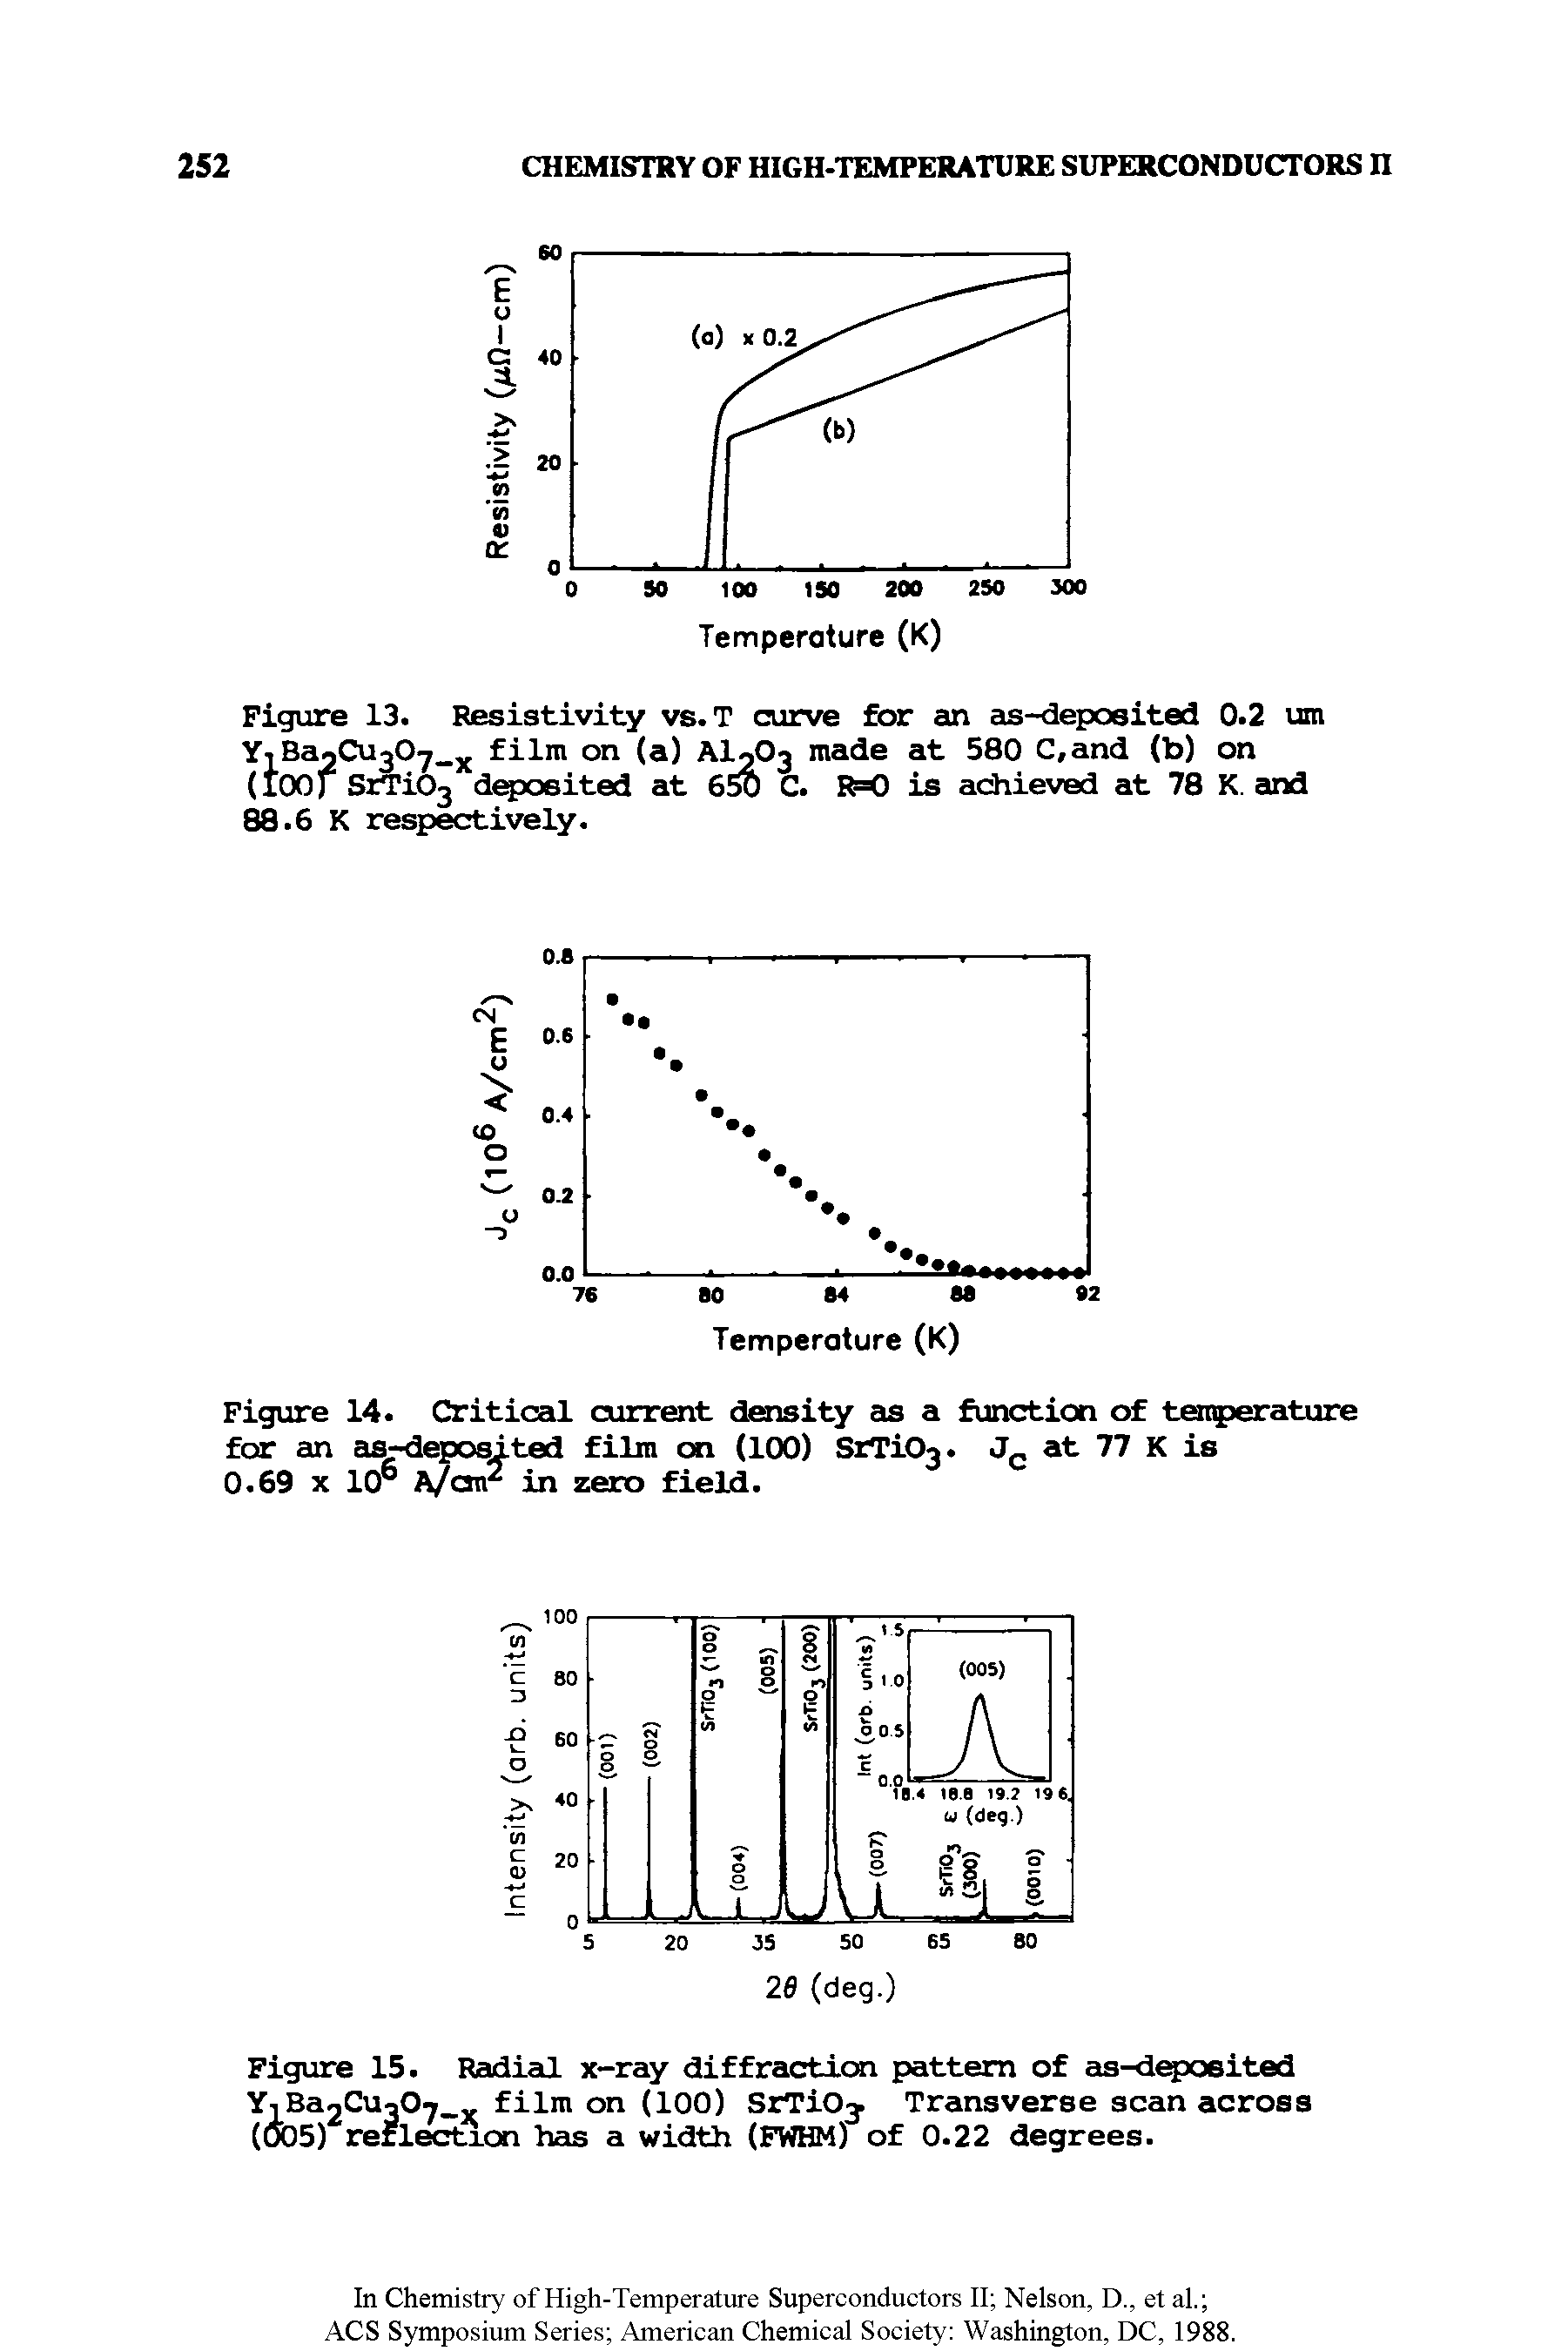 Figure 14. Critical current density as a function of temperature for an as depouted film on (100) SrTi03. at 77 K is 0.69 X 10 fi/atr in zero field.